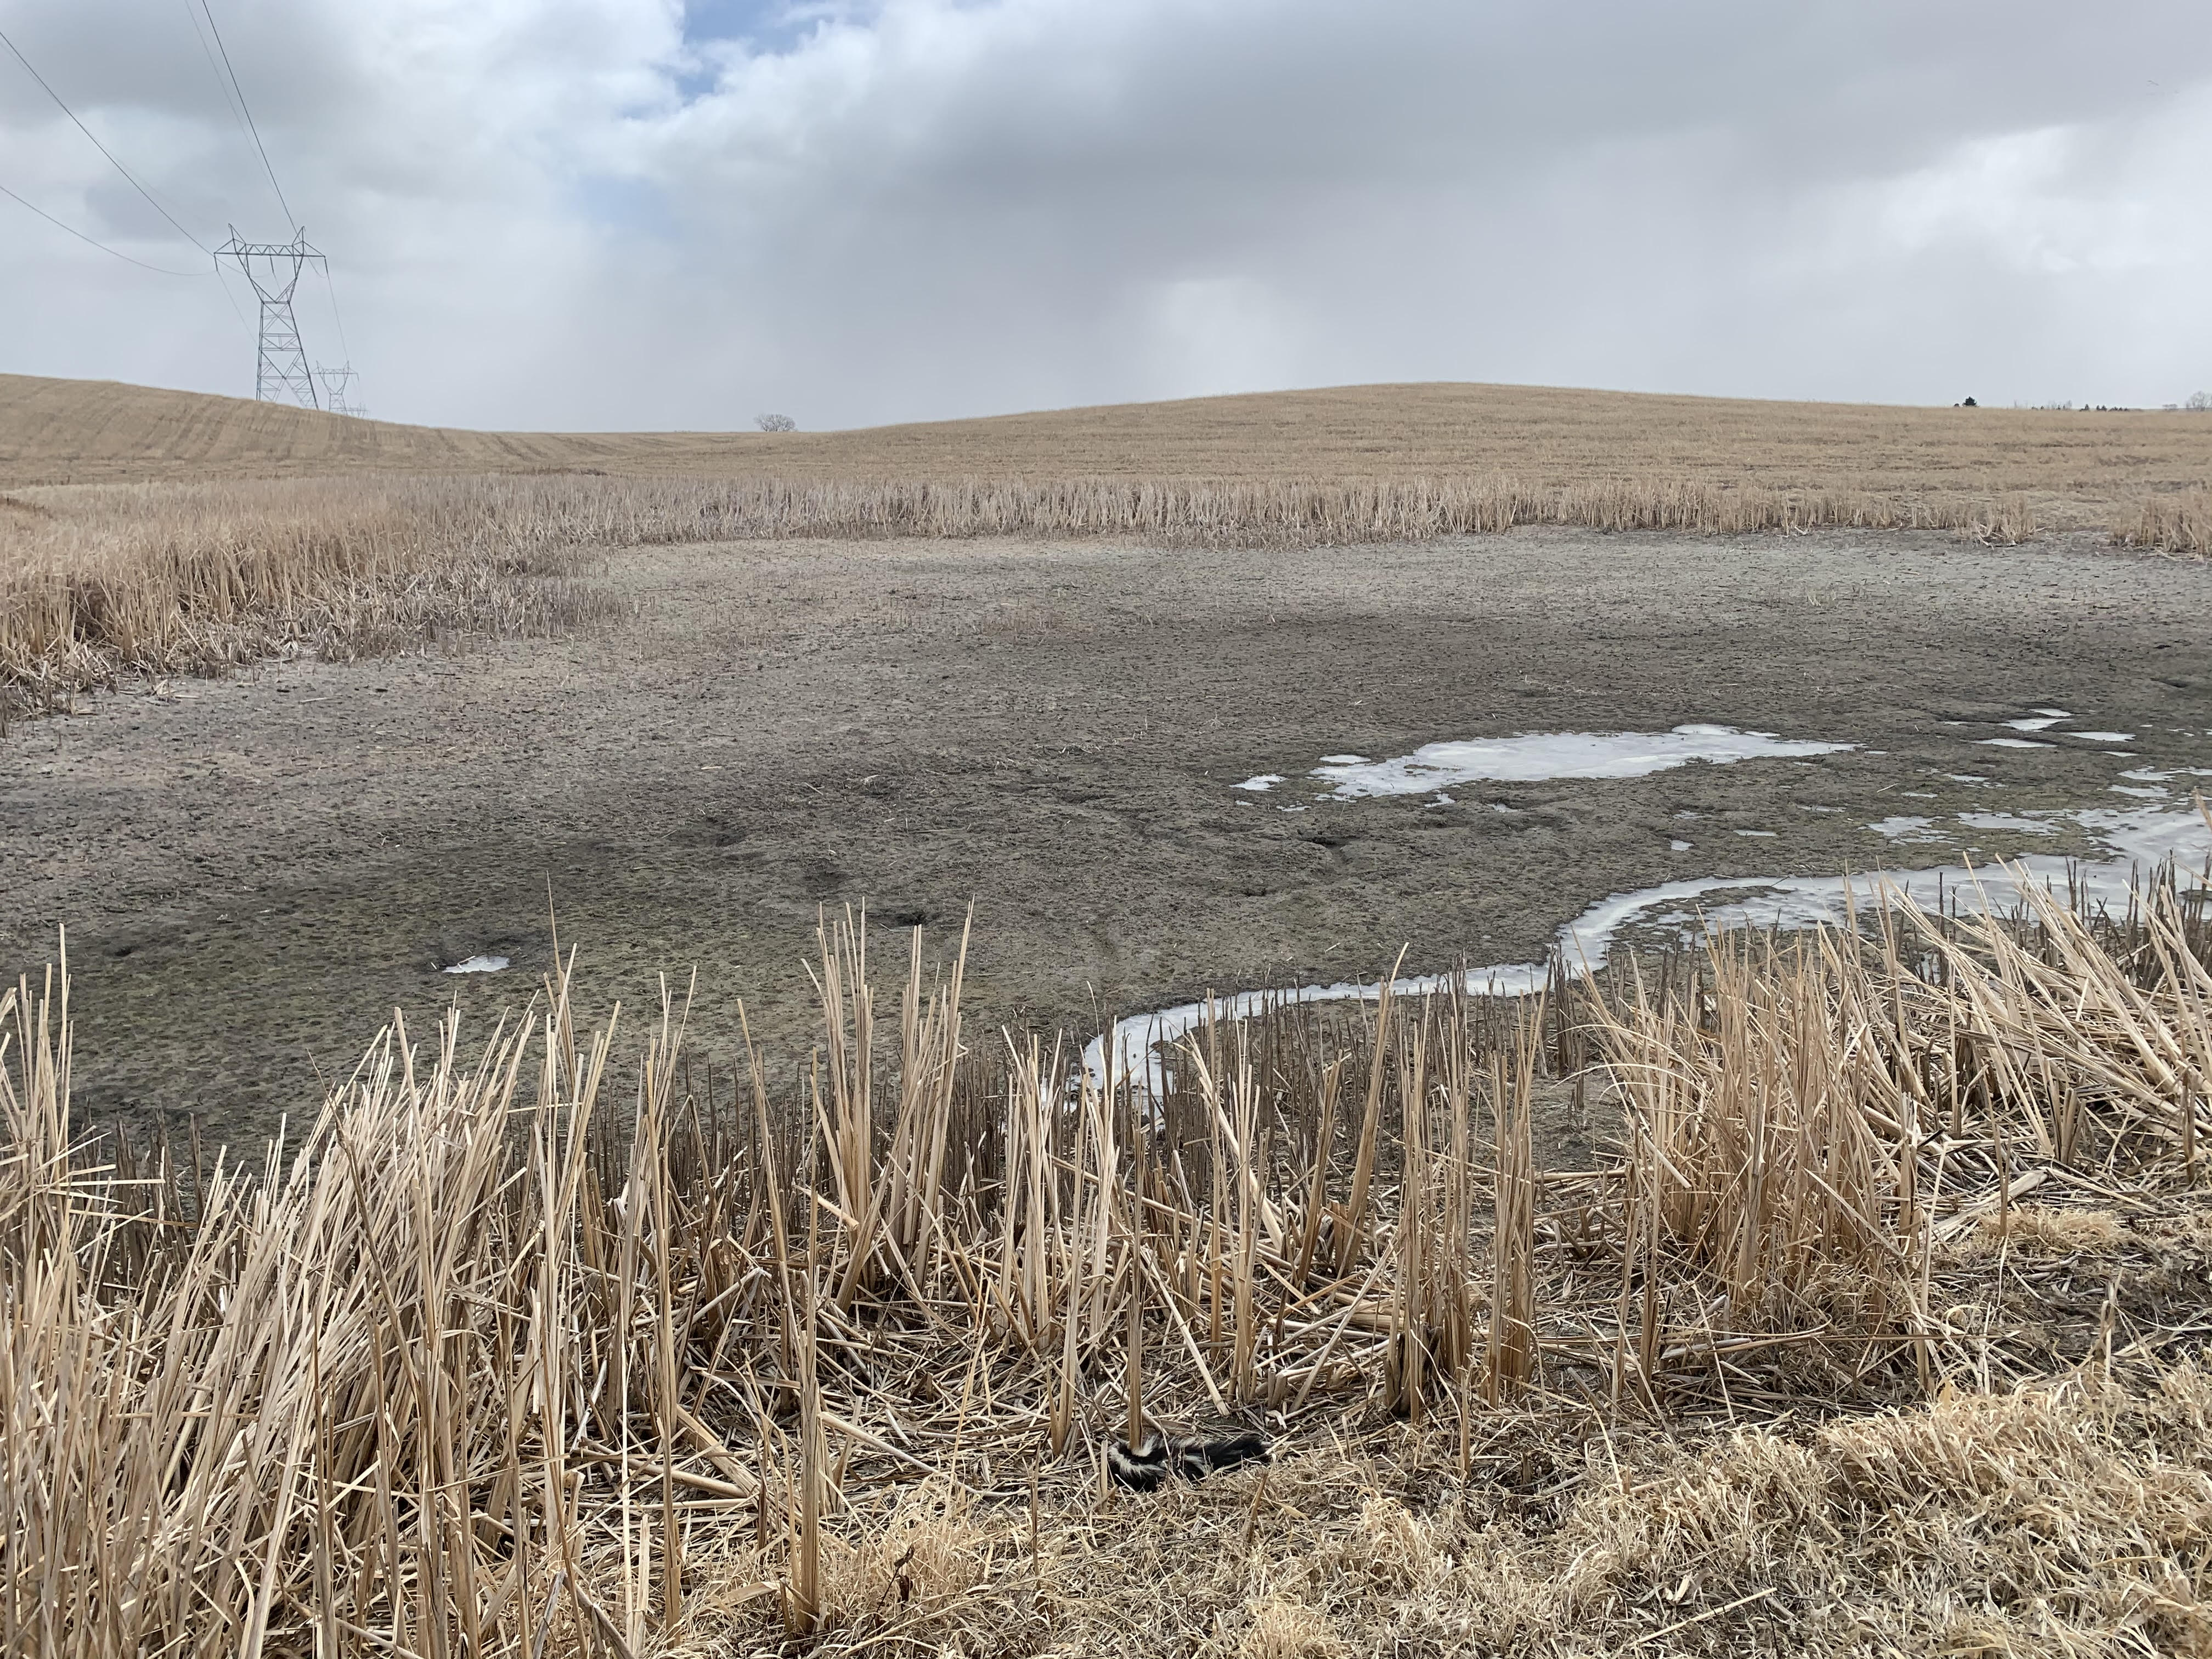 Morning Ag News, April 7, 2021: North Dakota drought conditions not expected to improve in the near future